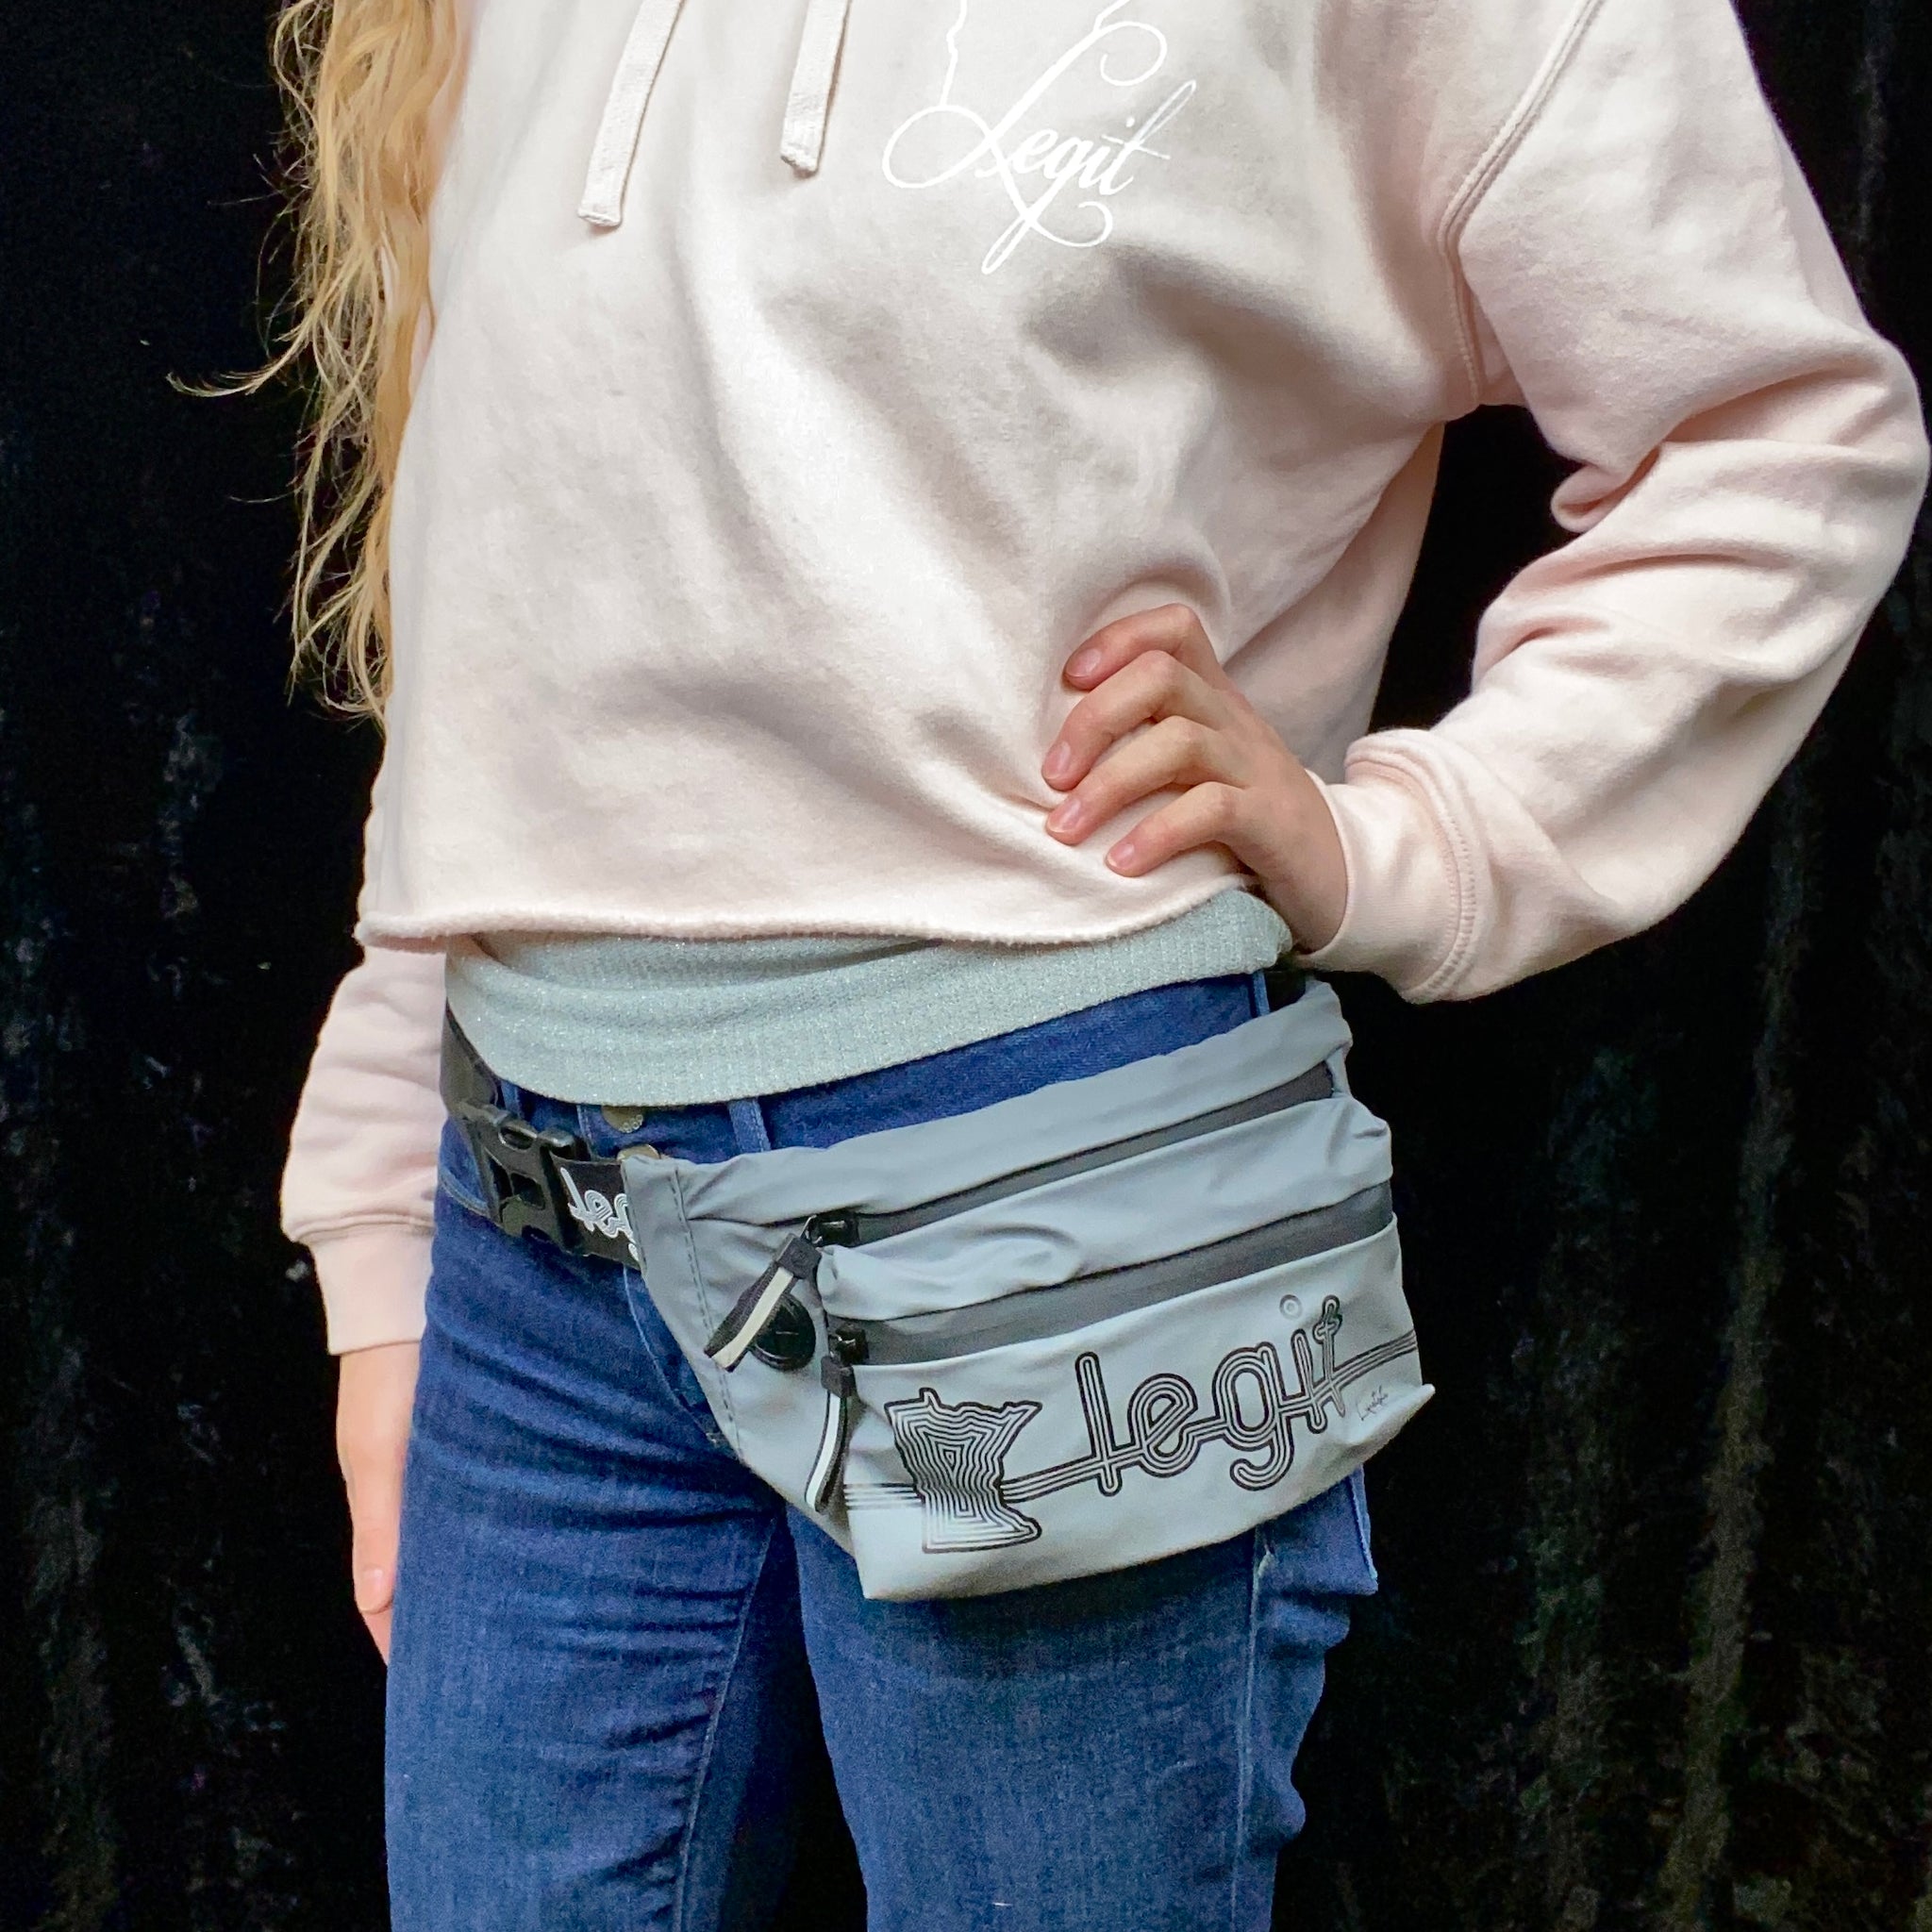 Water Resistant Fanny Pack *2 Color Options*